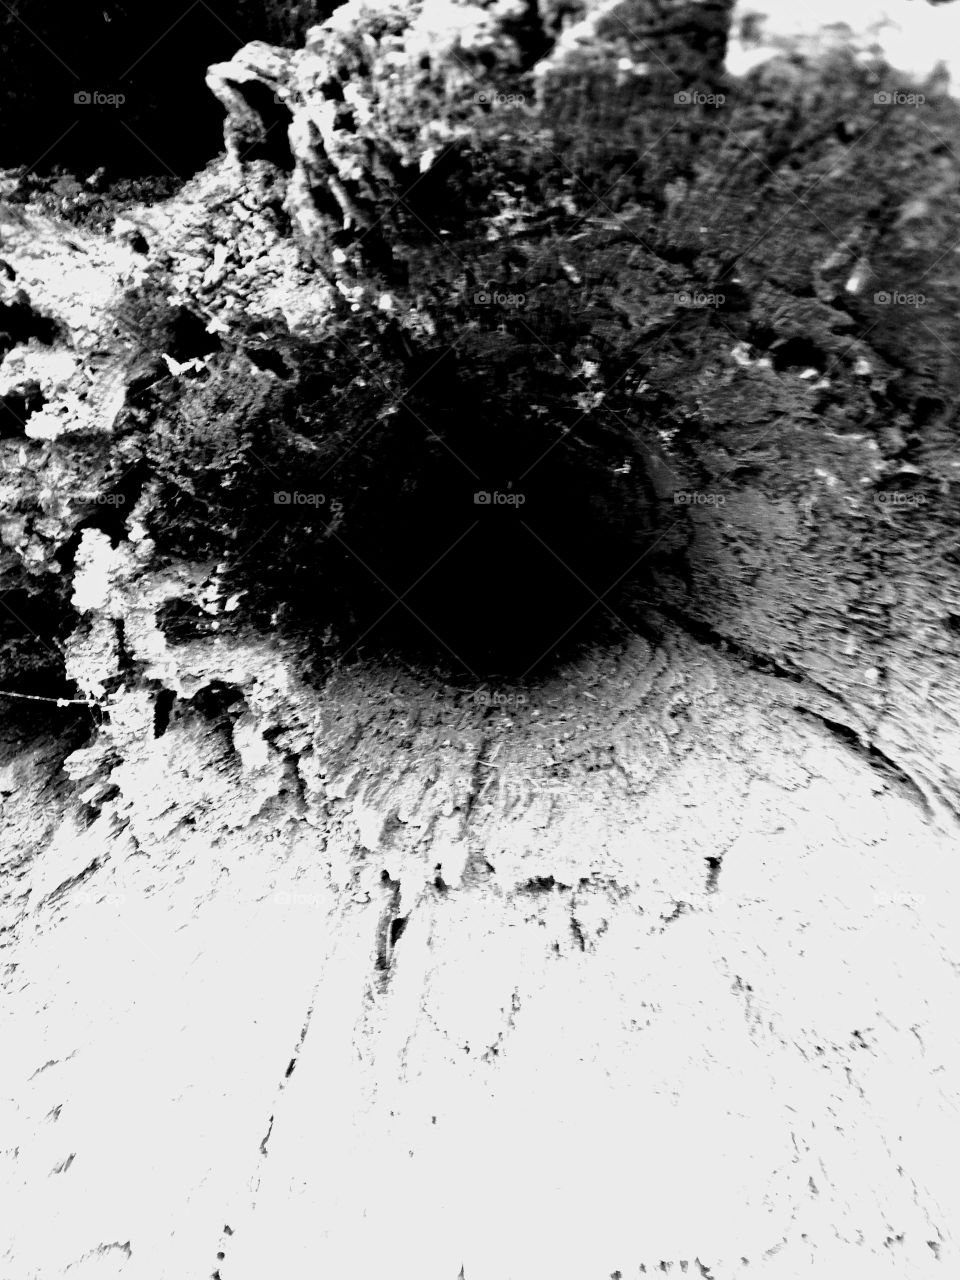 Nature makes the best art- looking into a hollow log